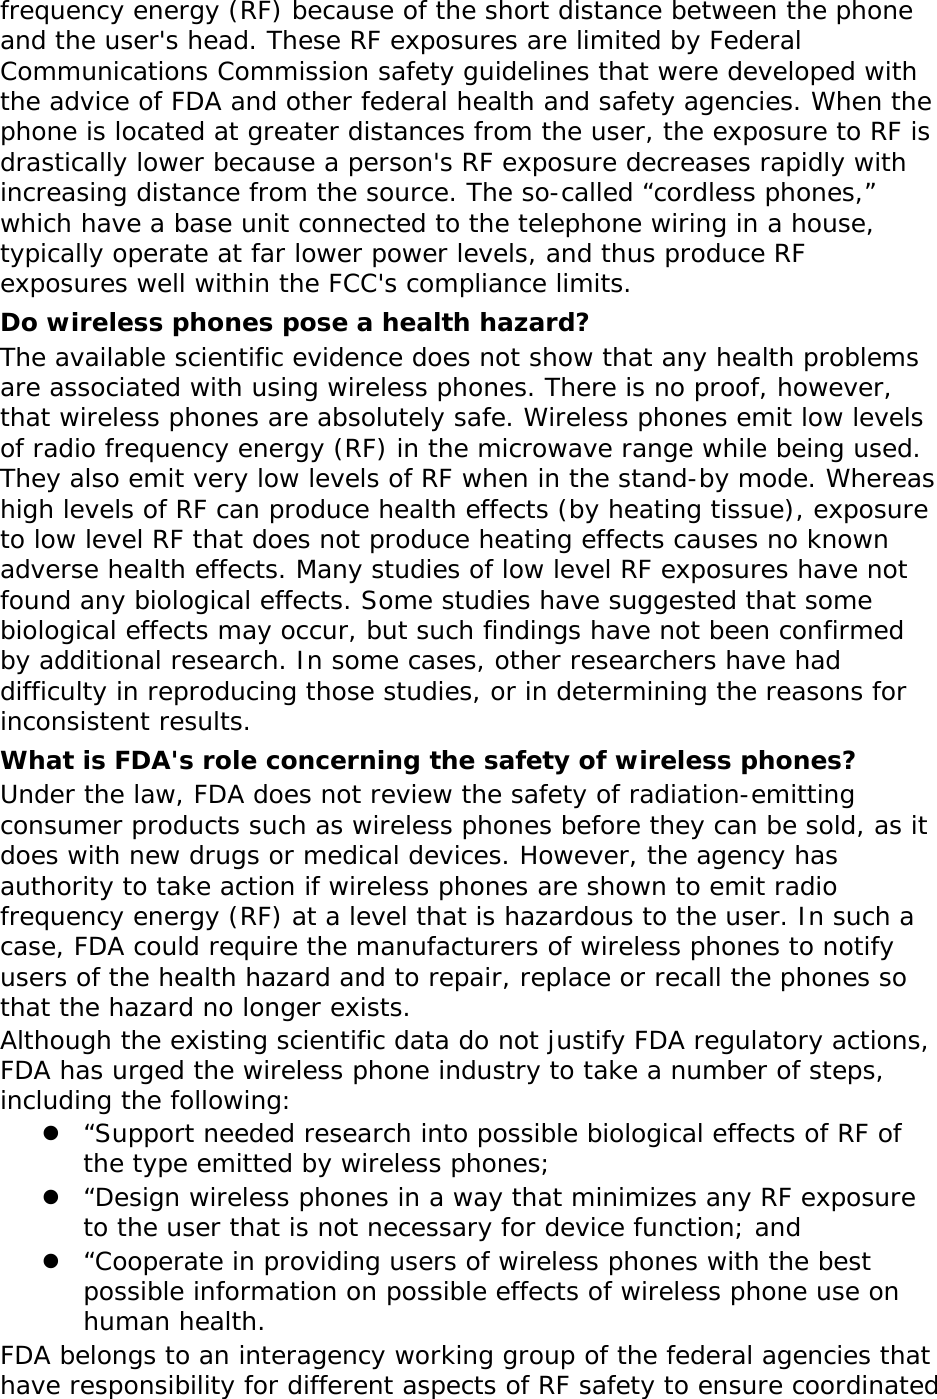 frequency energy (RF) because of the short distance between the phone and the user&apos;s head. These RF exposures are limited by Federal Communications Commission safety guidelines that were developed with the advice of FDA and other federal health and safety agencies. When the phone is located at greater distances from the user, the exposure to RF is drastically lower because a person&apos;s RF exposure decreases rapidly with increasing distance from the source. The so-called “cordless phones,” which have a base unit connected to the telephone wiring in a house, typically operate at far lower power levels, and thus produce RF exposures well within the FCC&apos;s compliance limits. Do wireless phones pose a health hazard? The available scientific evidence does not show that any health problems are associated with using wireless phones. There is no proof, however, that wireless phones are absolutely safe. Wireless phones emit low levels of radio frequency energy (RF) in the microwave range while being used. They also emit very low levels of RF when in the stand-by mode. Whereas high levels of RF can produce health effects (by heating tissue), exposure to low level RF that does not produce heating effects causes no known adverse health effects. Many studies of low level RF exposures have not found any biological effects. Some studies have suggested that some biological effects may occur, but such findings have not been confirmed by additional research. In some cases, other researchers have had difficulty in reproducing those studies, or in determining the reasons for inconsistent results. What is FDA&apos;s role concerning the safety of wireless phones? Under the law, FDA does not review the safety of radiation-emitting consumer products such as wireless phones before they can be sold, as it does with new drugs or medical devices. However, the agency has authority to take action if wireless phones are shown to emit radio frequency energy (RF) at a level that is hazardous to the user. In such a case, FDA could require the manufacturers of wireless phones to notify users of the health hazard and to repair, replace or recall the phones so that the hazard no longer exists. Although the existing scientific data do not justify FDA regulatory actions, FDA has urged the wireless phone industry to take a number of steps, including the following: z “Support needed research into possible biological effects of RF of the type emitted by wireless phones; z “Design wireless phones in a way that minimizes any RF exposure to the user that is not necessary for device function; and z “Cooperate in providing users of wireless phones with the best possible information on possible effects of wireless phone use on human health. FDA belongs to an interagency working group of the federal agencies that have responsibility for different aspects of RF safety to ensure coordinated 